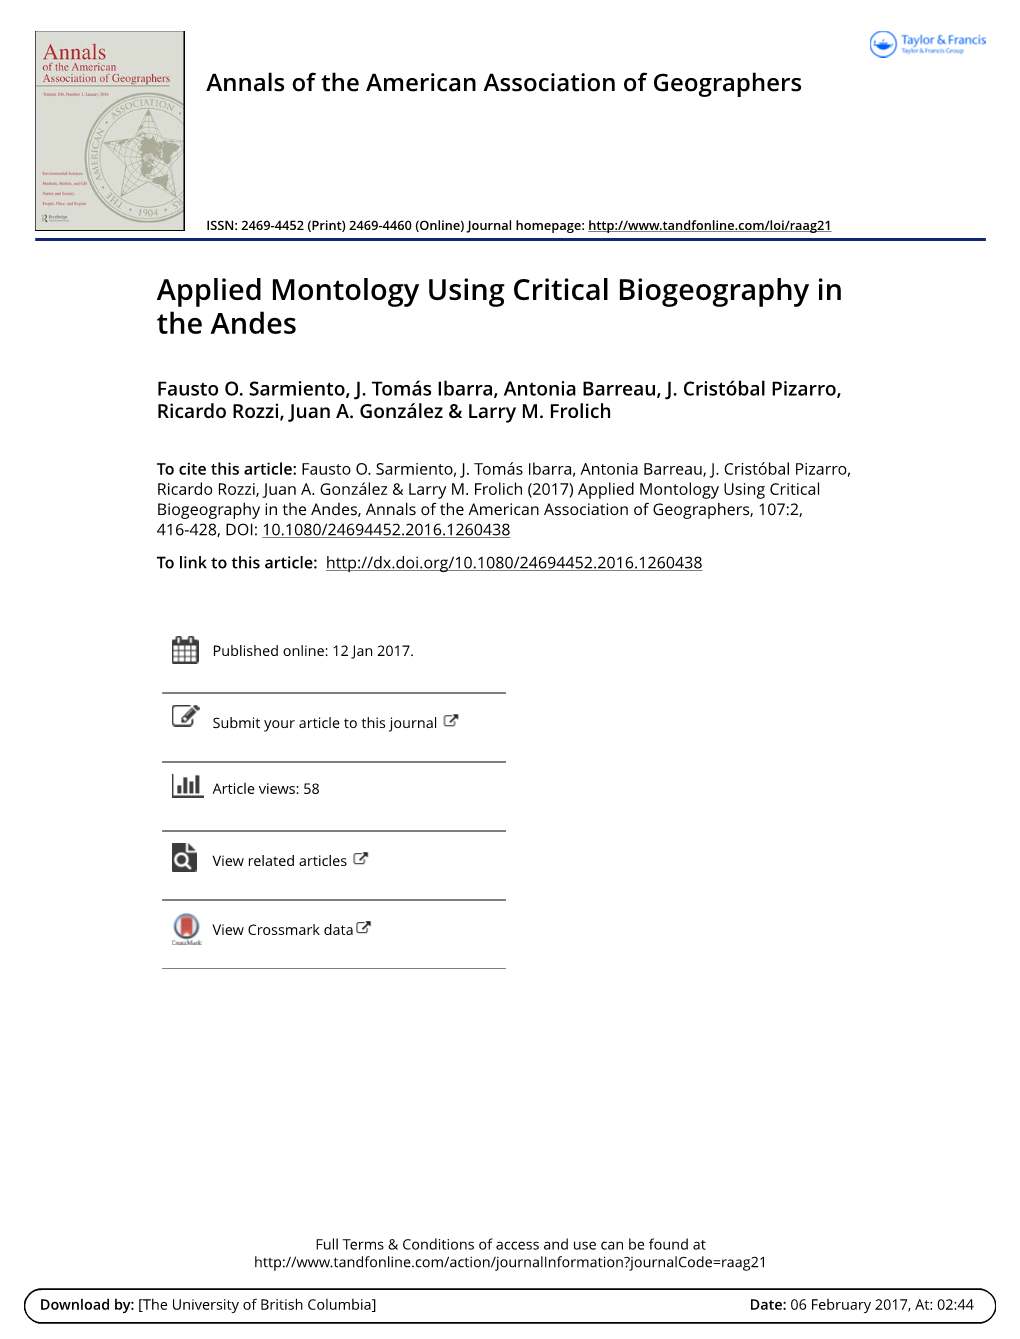 Applied Montology Using Critical Biogeography in the Andes